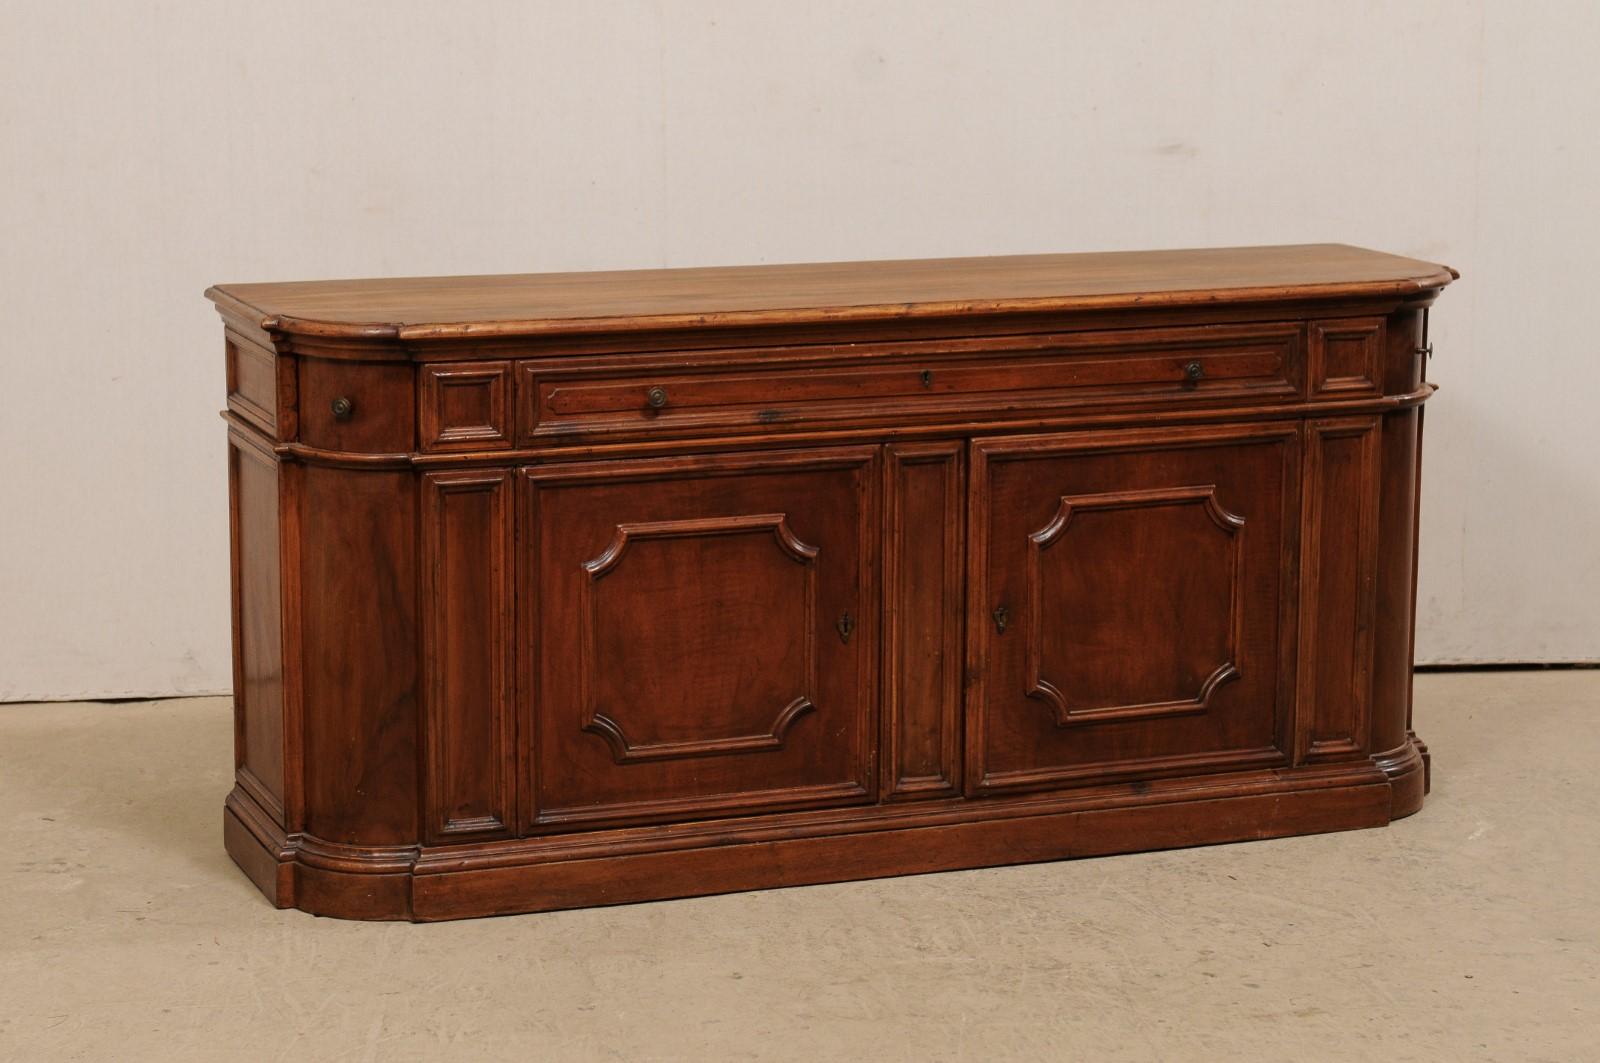 An American wooden buffet cabinet from the mid-20th century. This vintage console cabinet is just over 6 feet in length and has been fashioned from fruitwood with a warm cherry stain. It is accentuated about it's body with nicely molded trim and